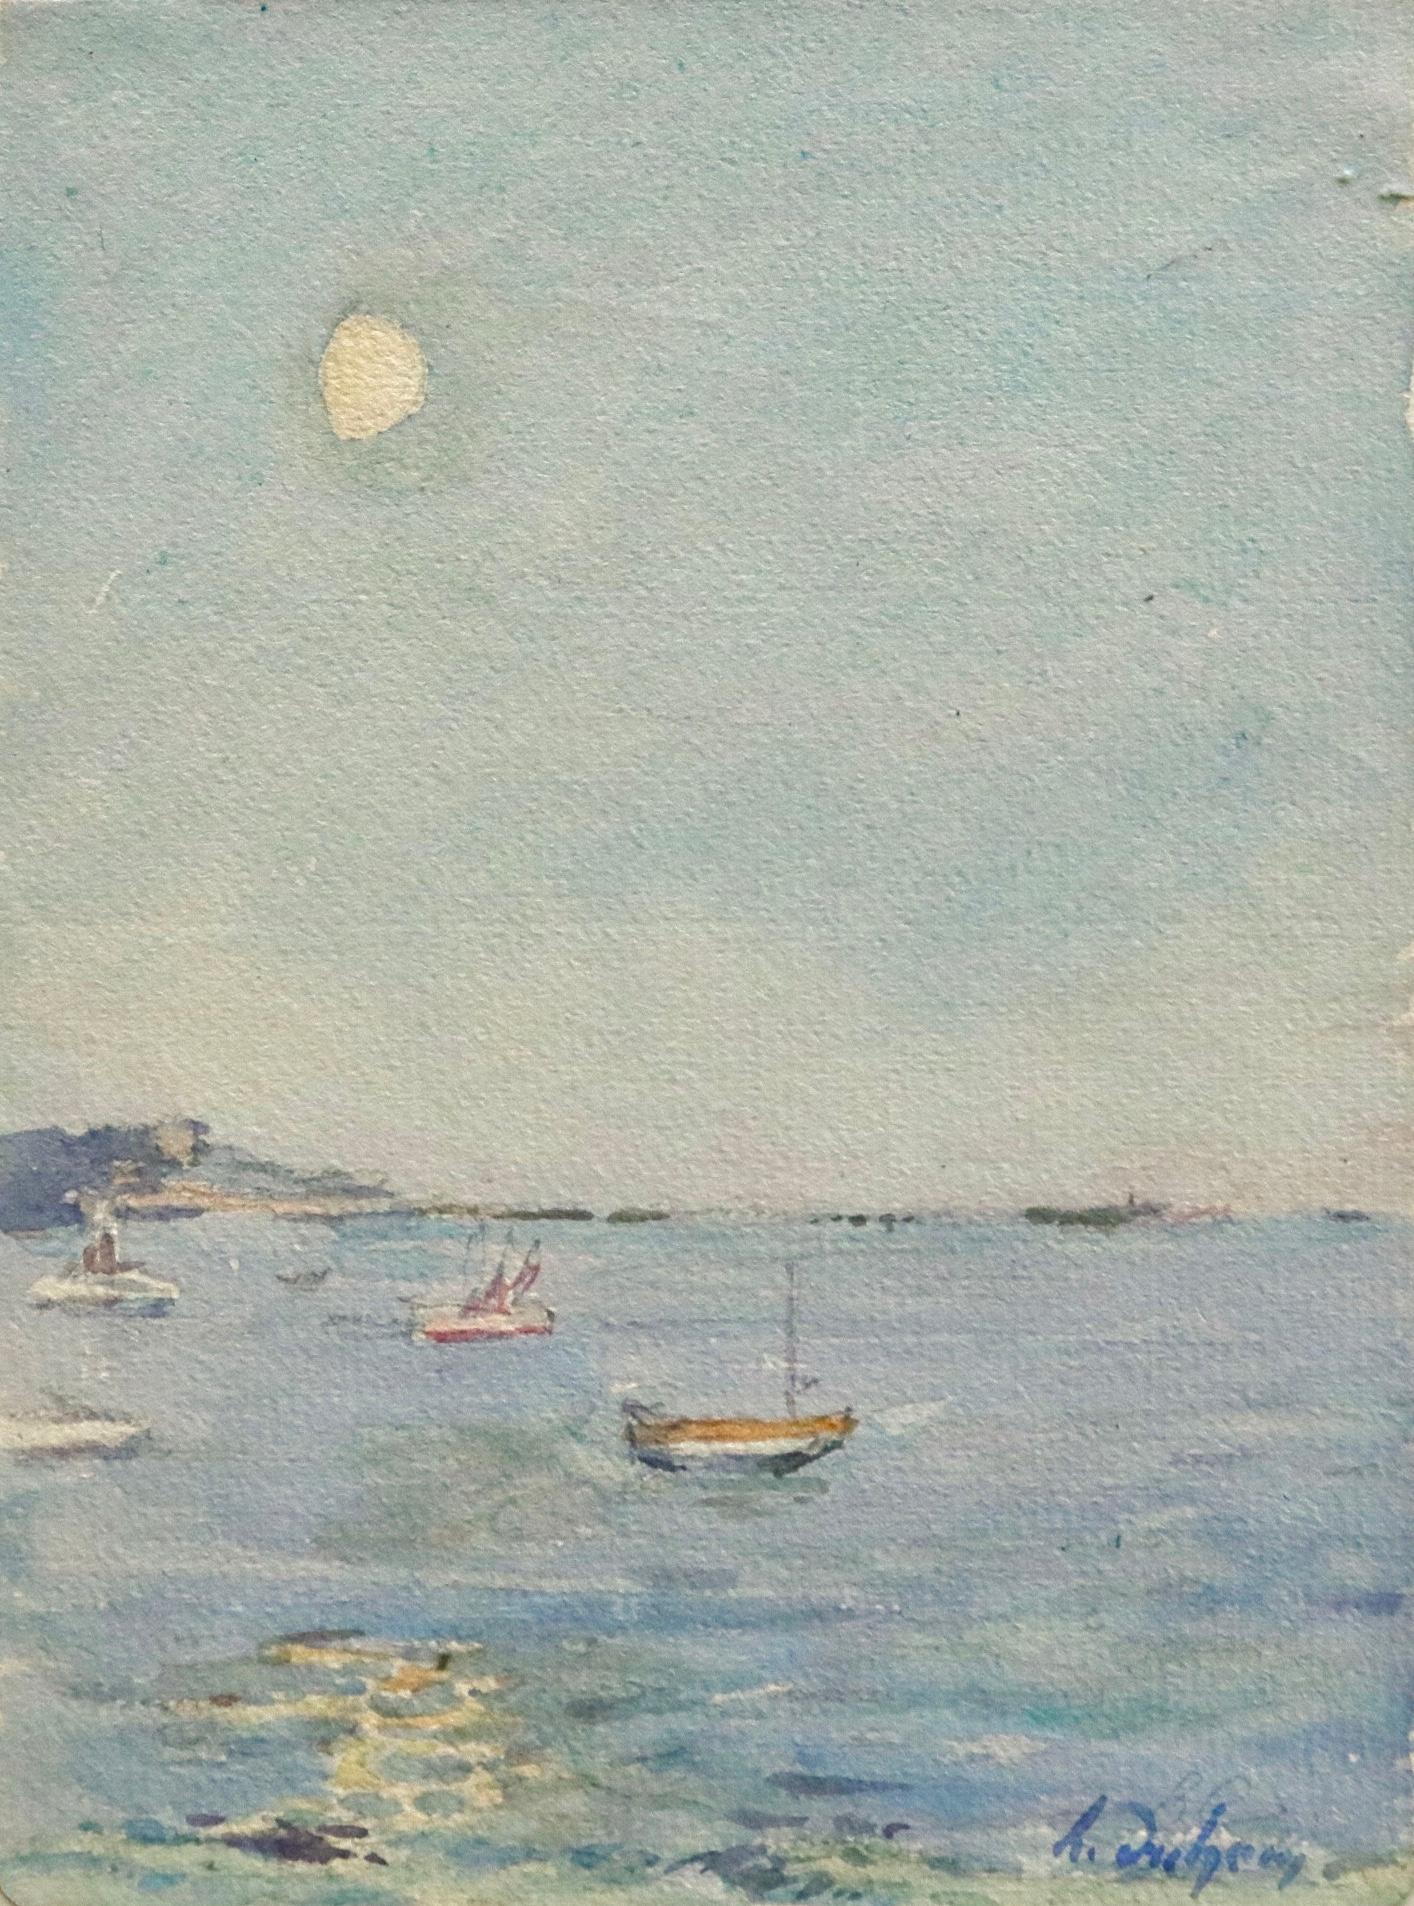 Watercolour on paper circa 1925 by Henri Duhem depicting boats on a calm, serene sea with the sun high in the sky. Signed lower right with the artist's notes to the painting on the reverse. This painting is not currently framed but a suitable frame